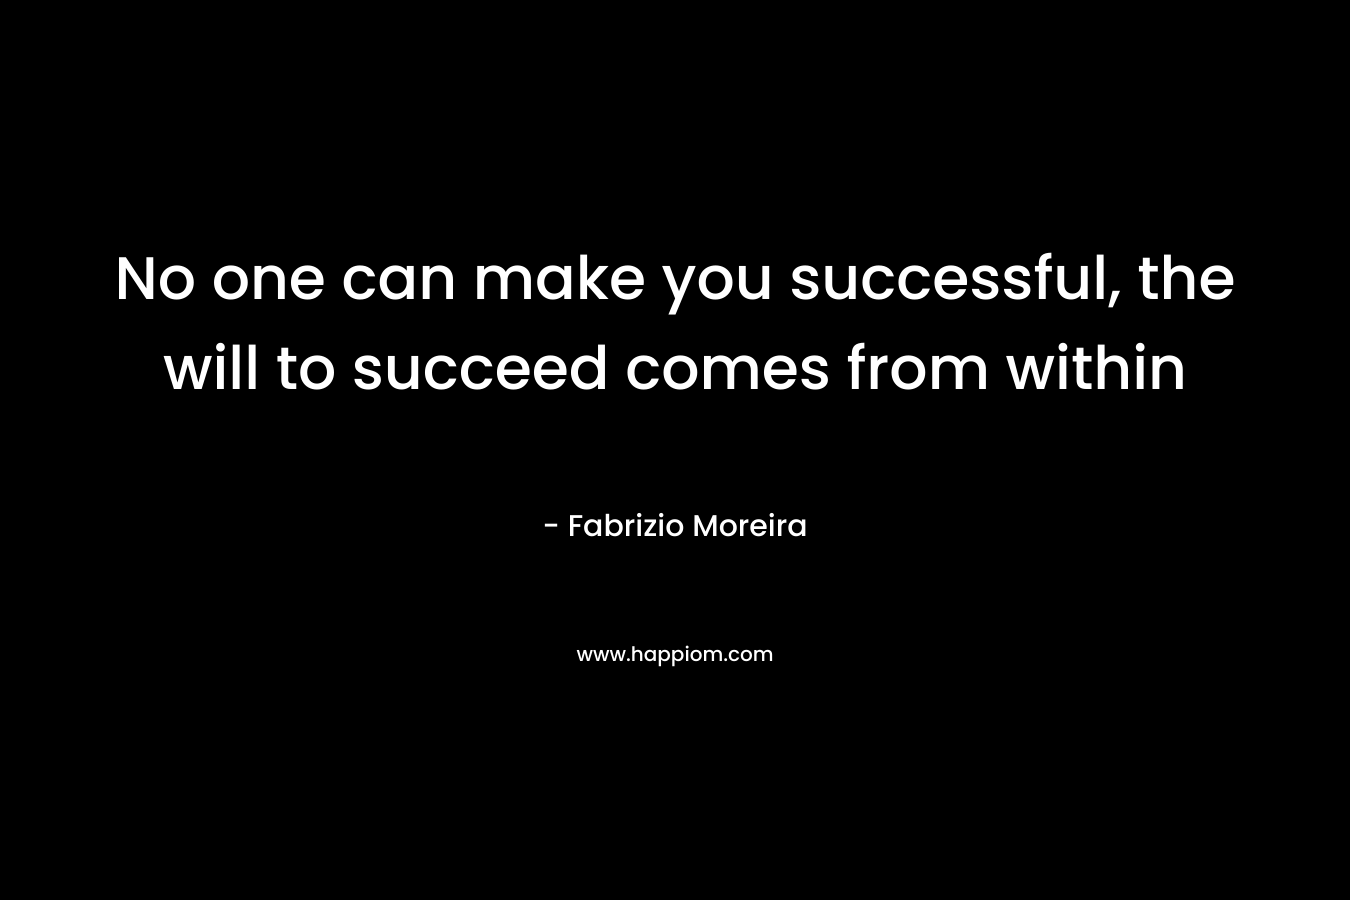 No one can make you successful, the will to succeed comes from within – Fabrizio Moreira